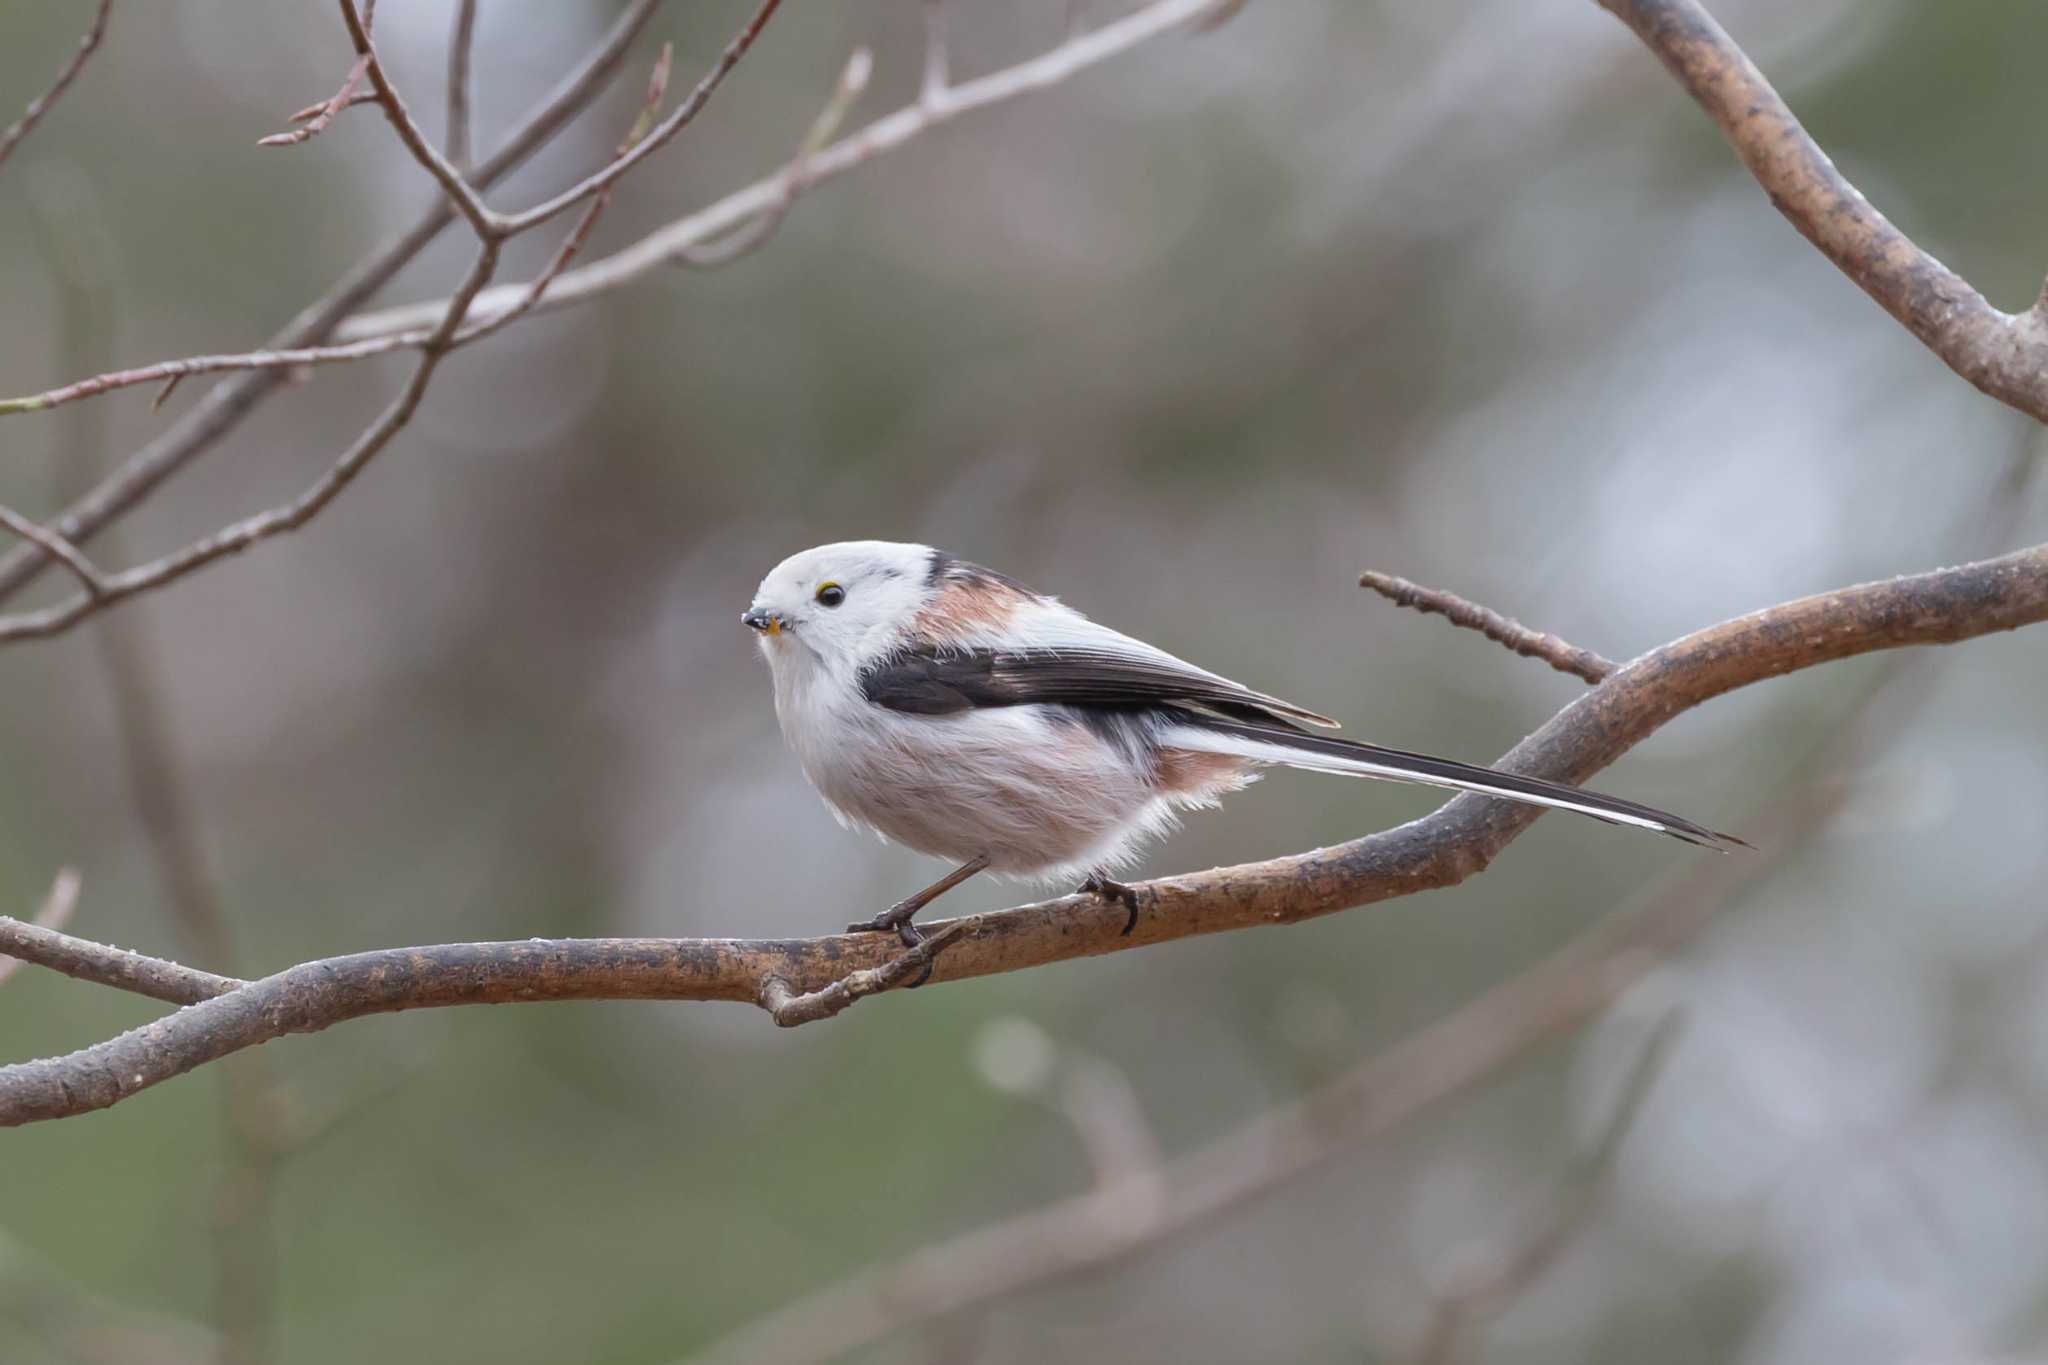 Photo of Long-tailed tit(japonicus) at The Bird Watching Cafe by 小鳥遊雪子